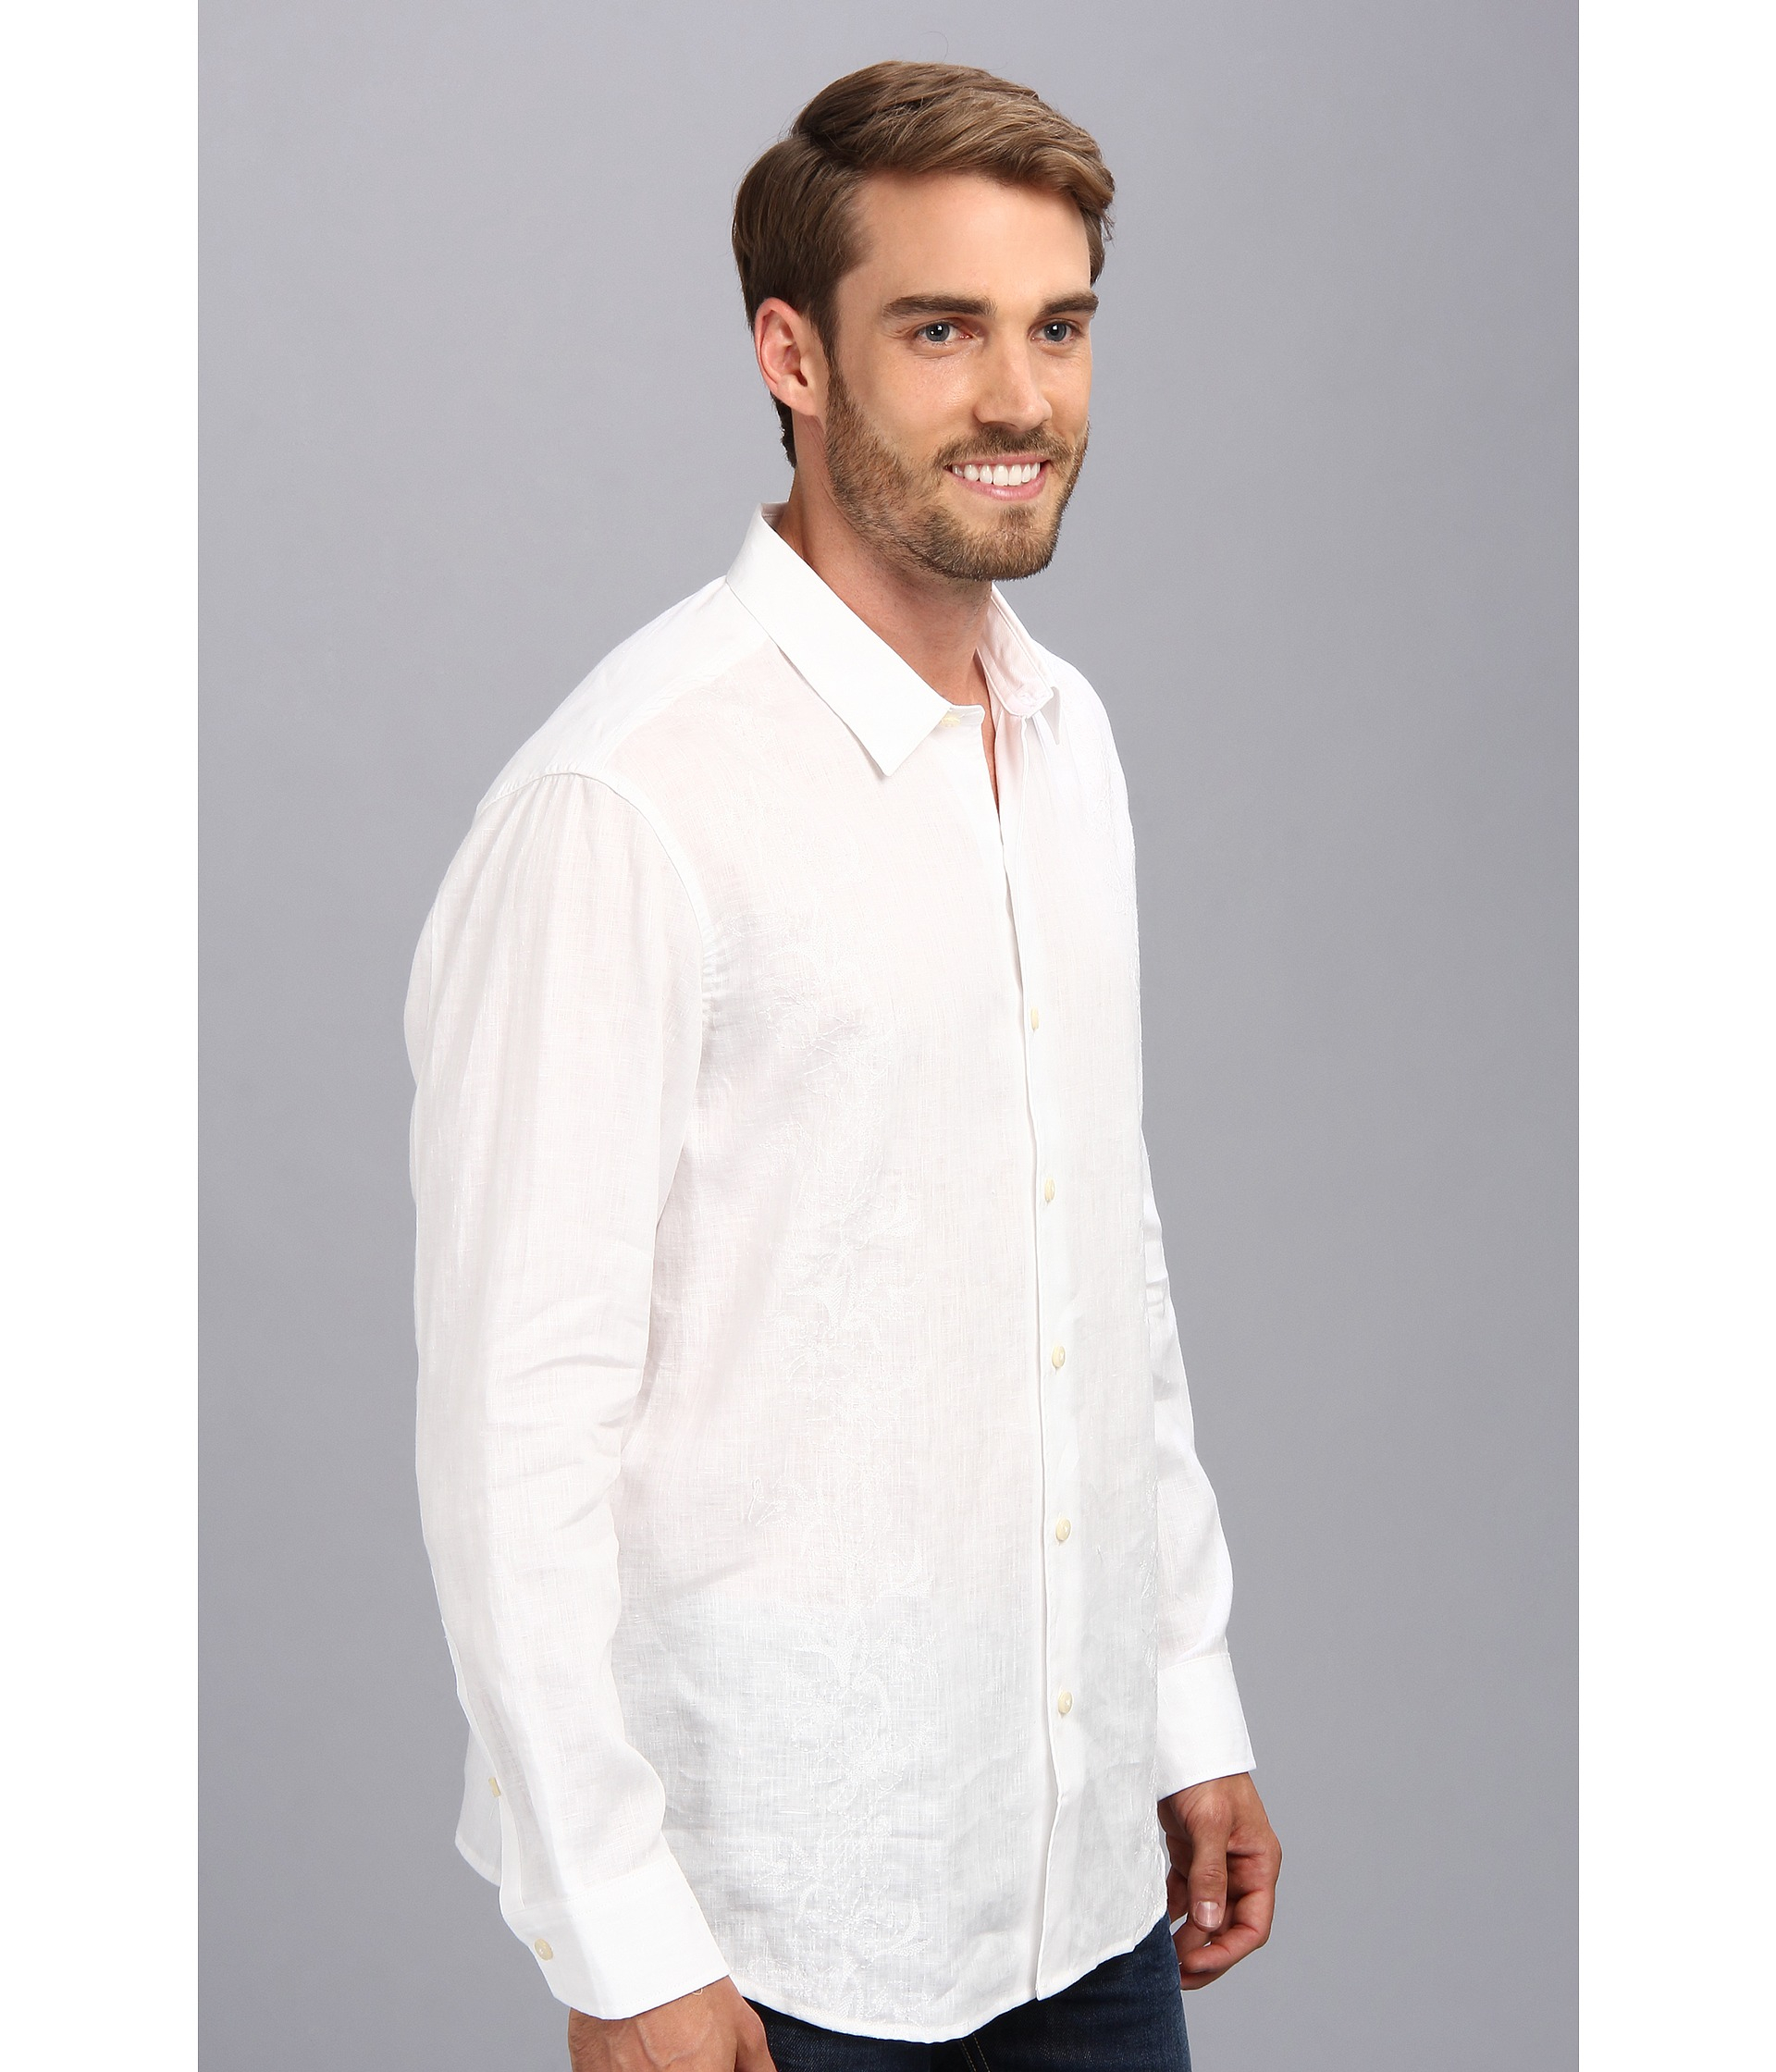 Tommy Bahama White Island Modern Fit White Knight Linen Ls Shirt Product 1 20326624 5 838543531 Normal 